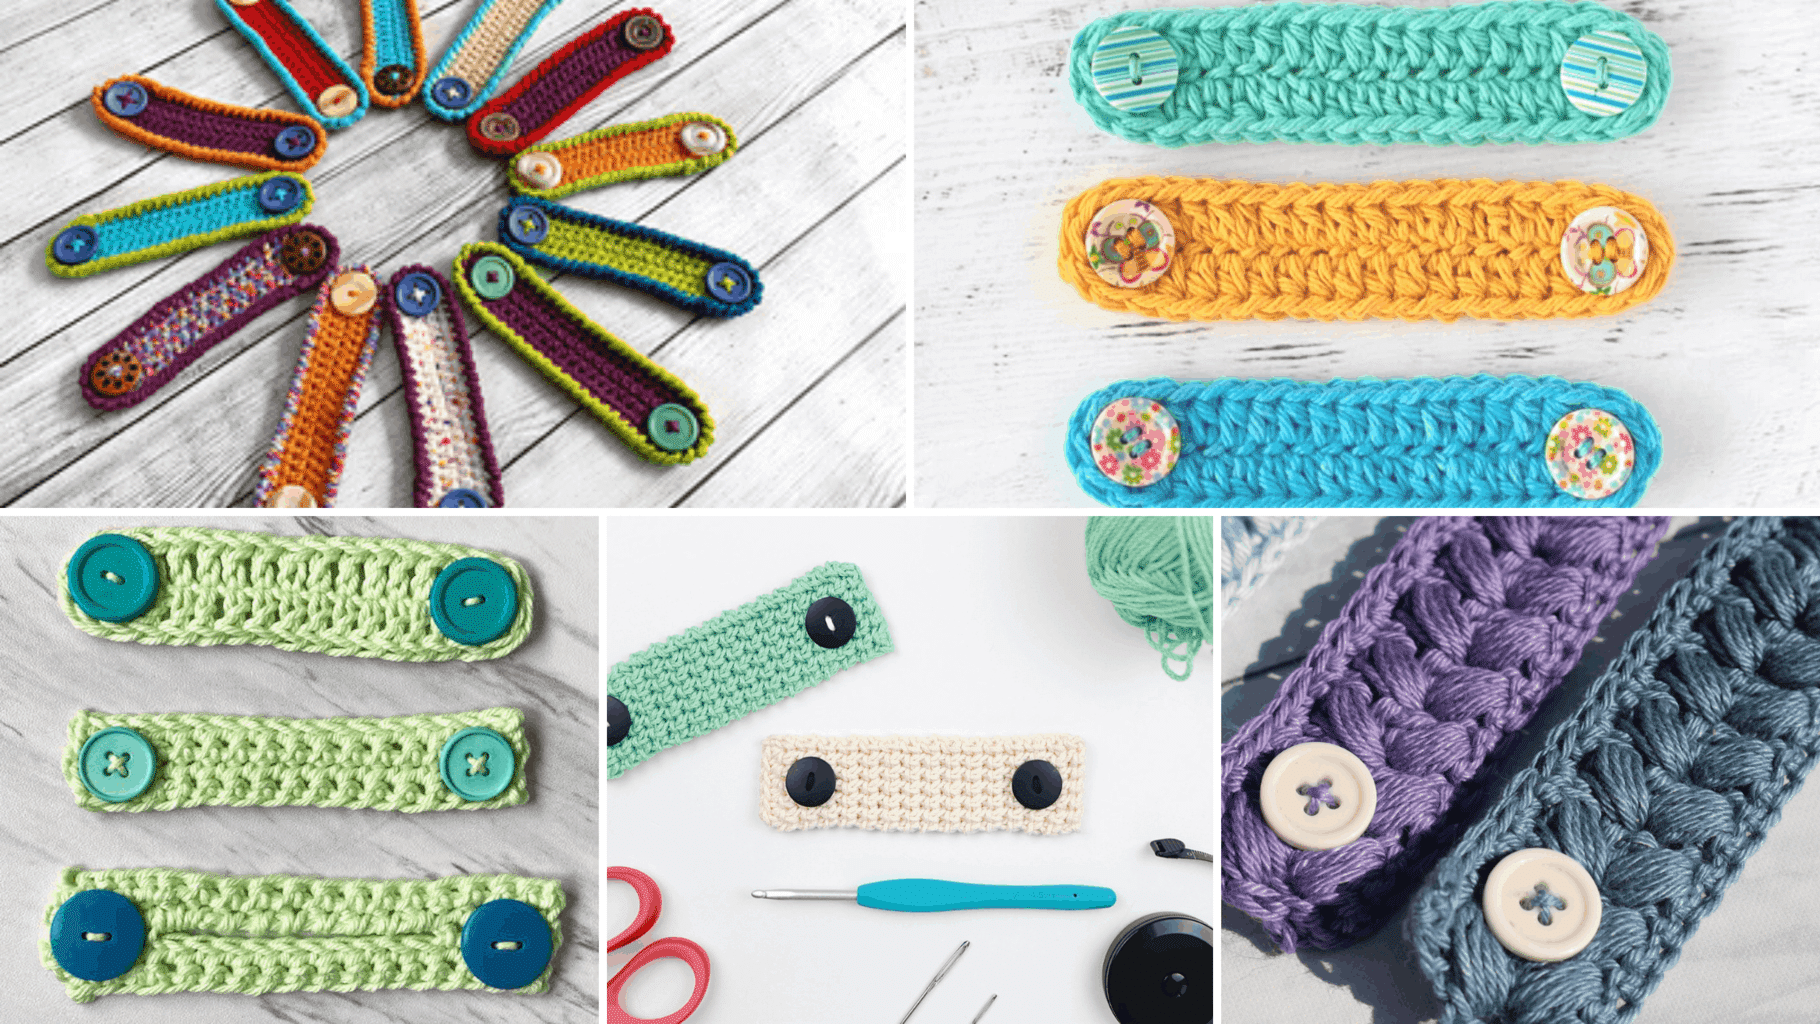 How to Crochet in the Round - A Step-by-Step Picture Tutorial - sigoni  macaroni